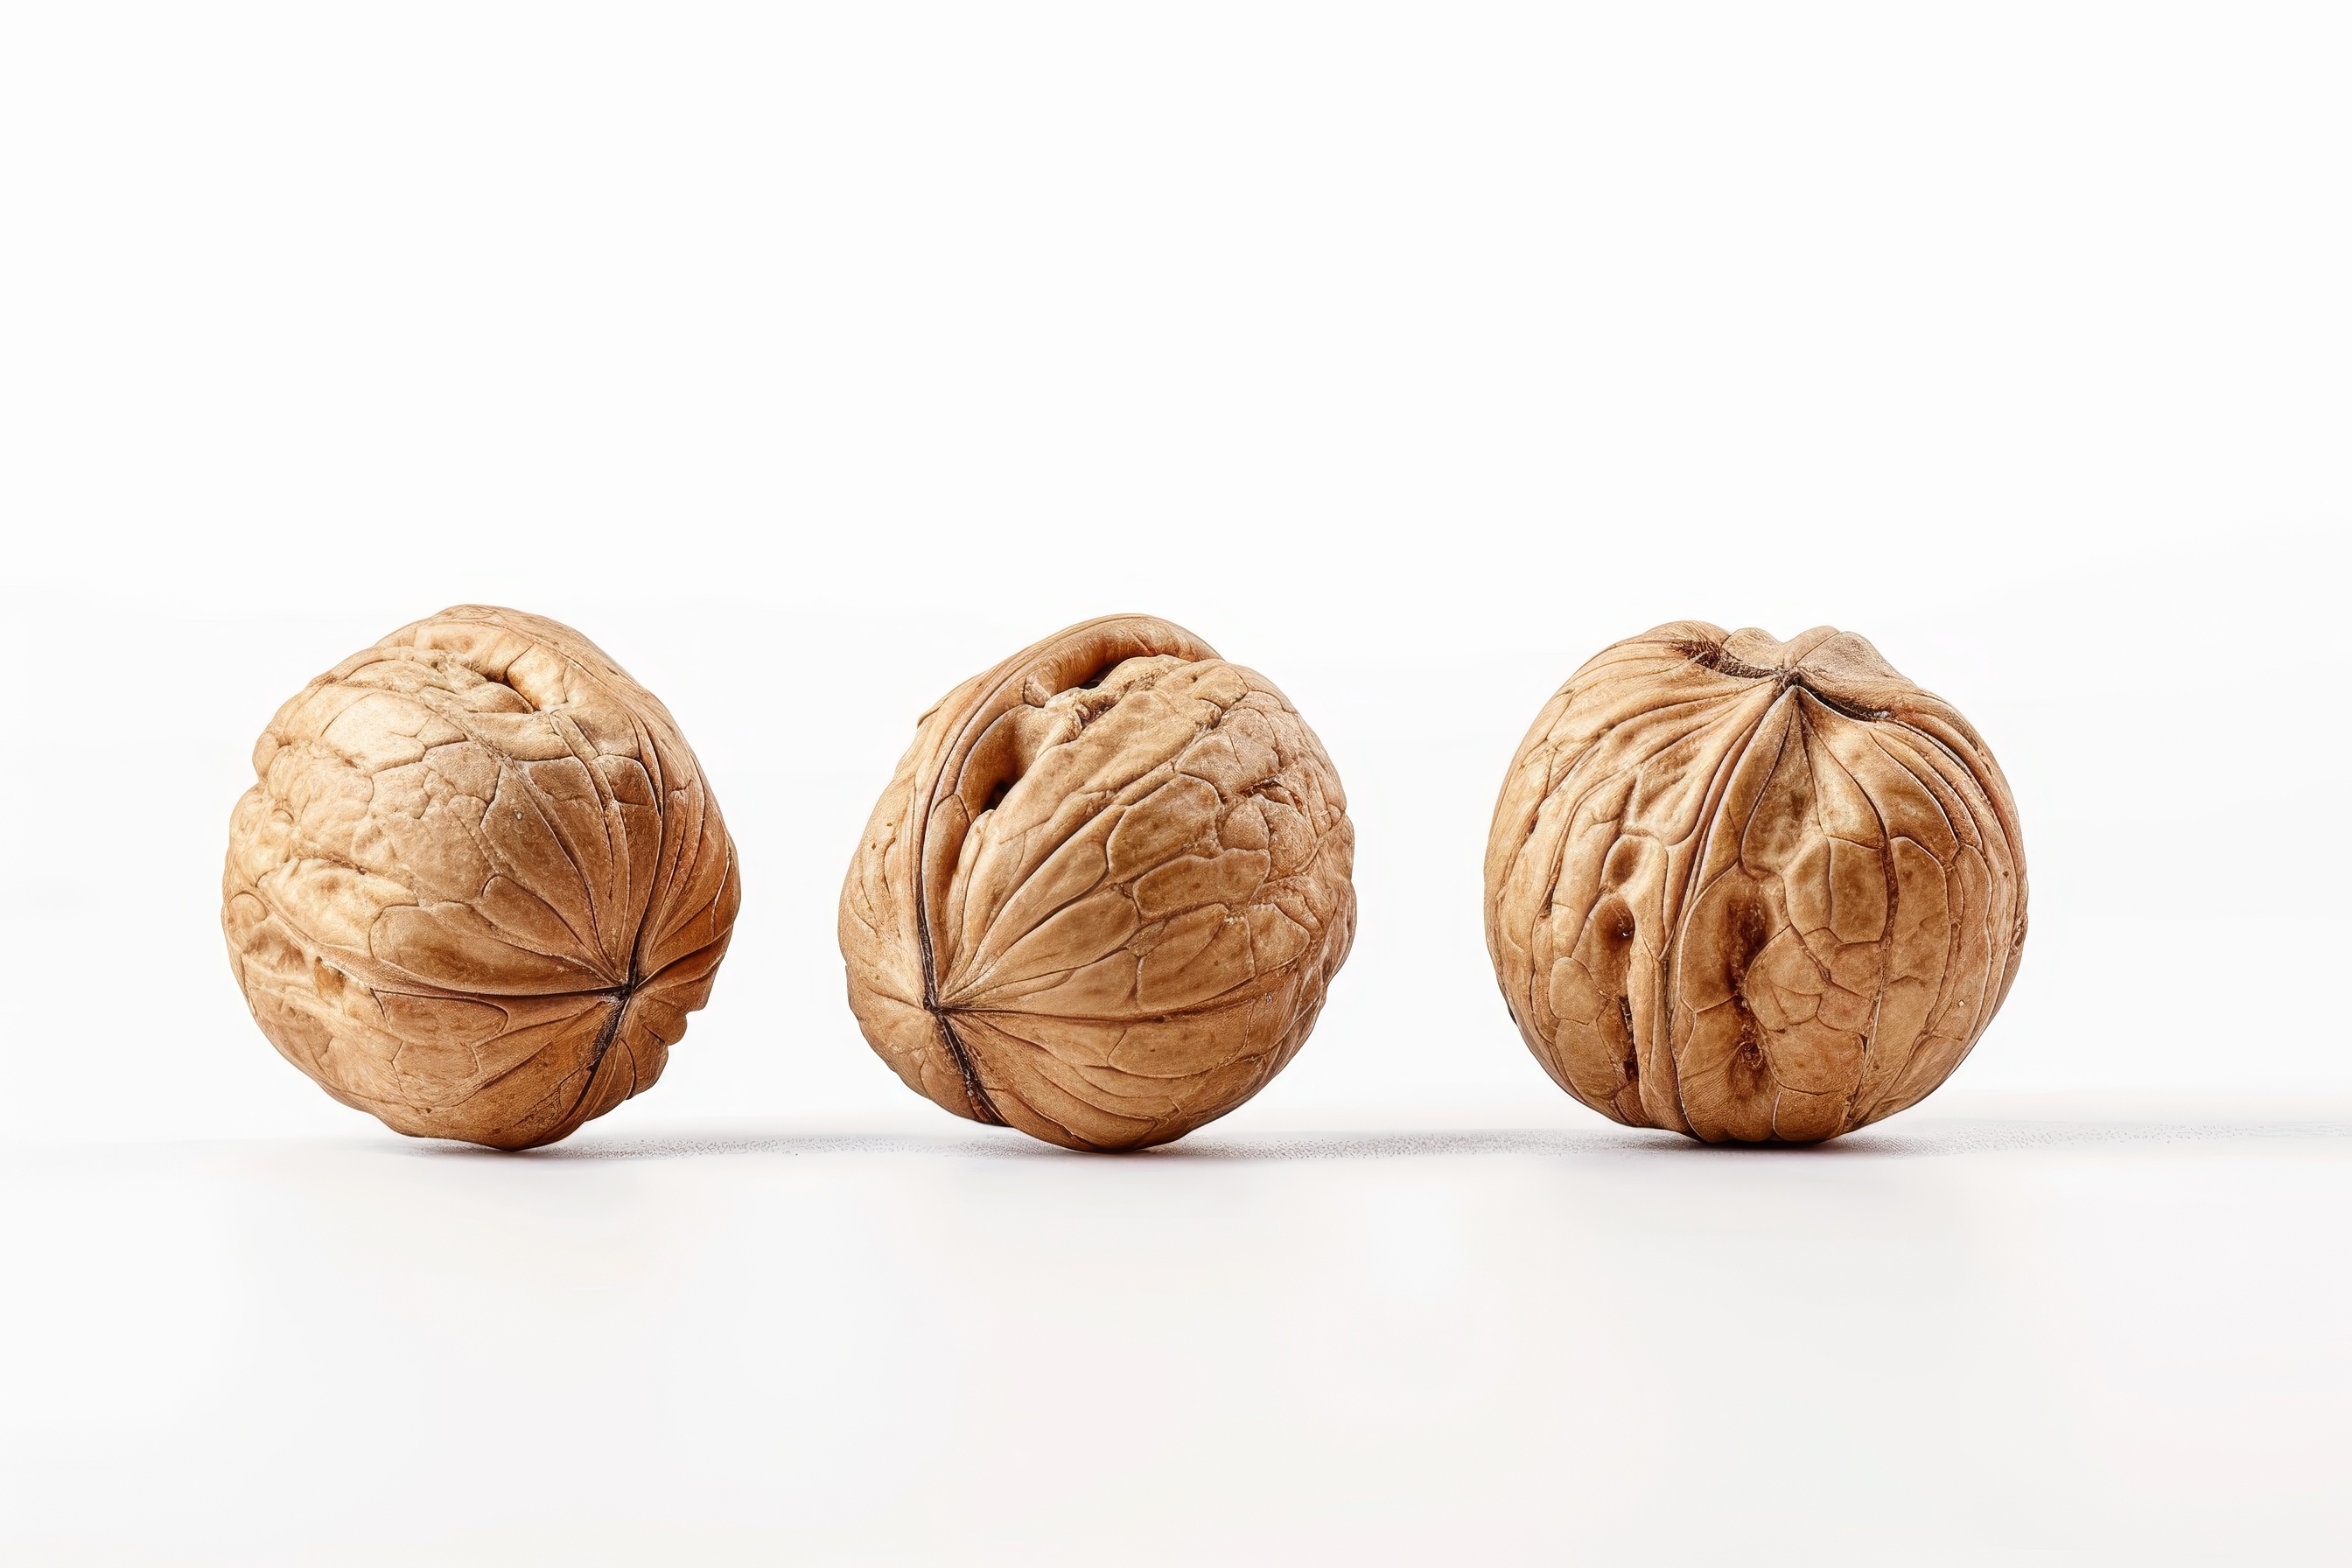 Three walnuts isolated on white background